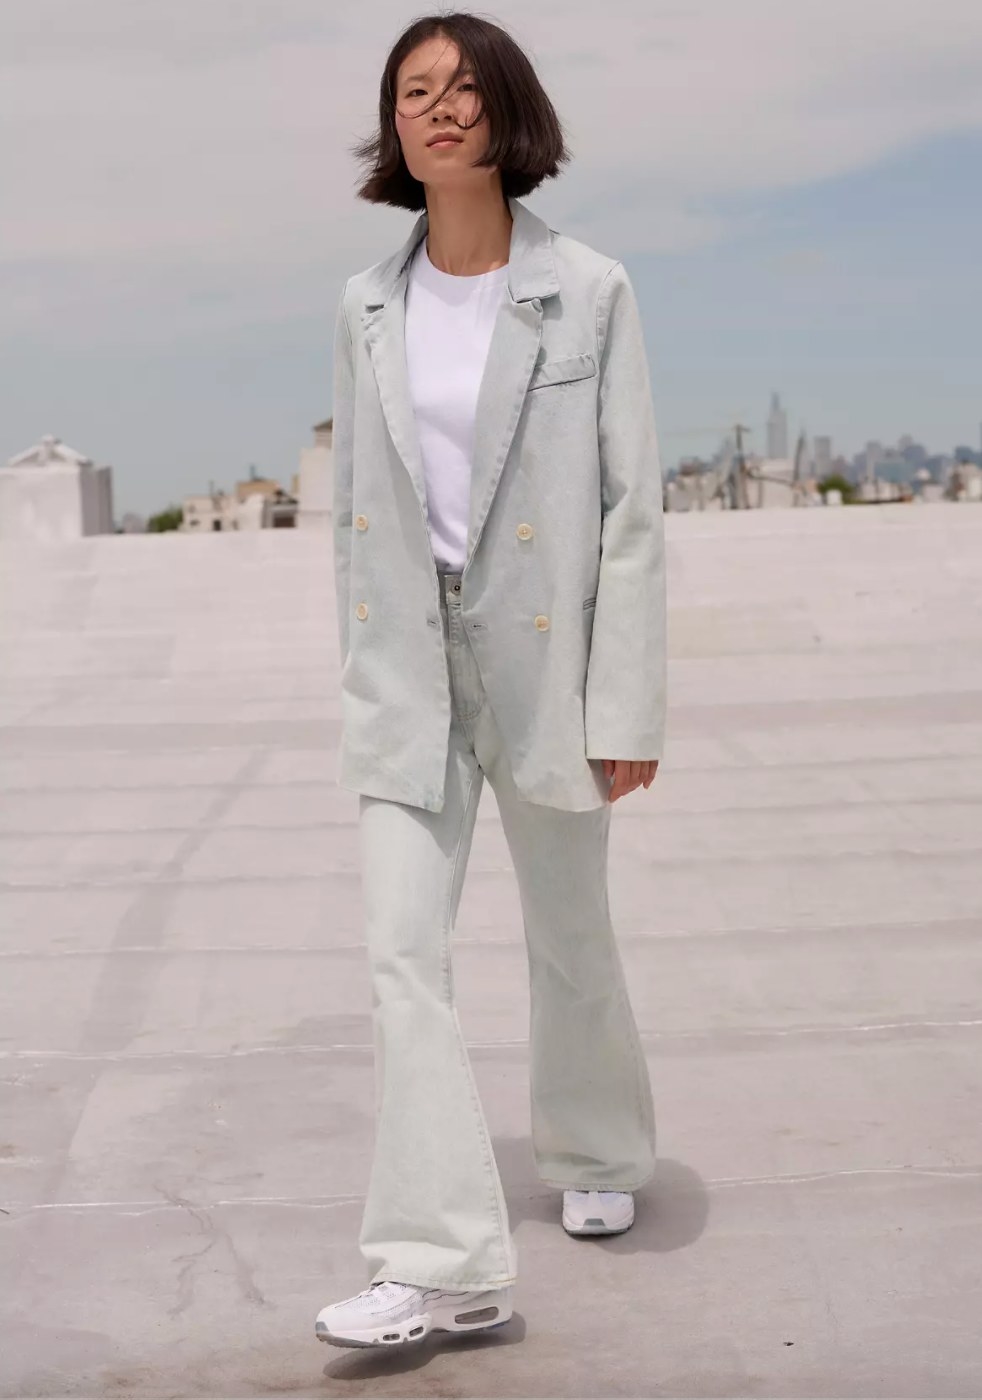 The winter sports coat in freshies lightwash being worn by a model on a rooftop